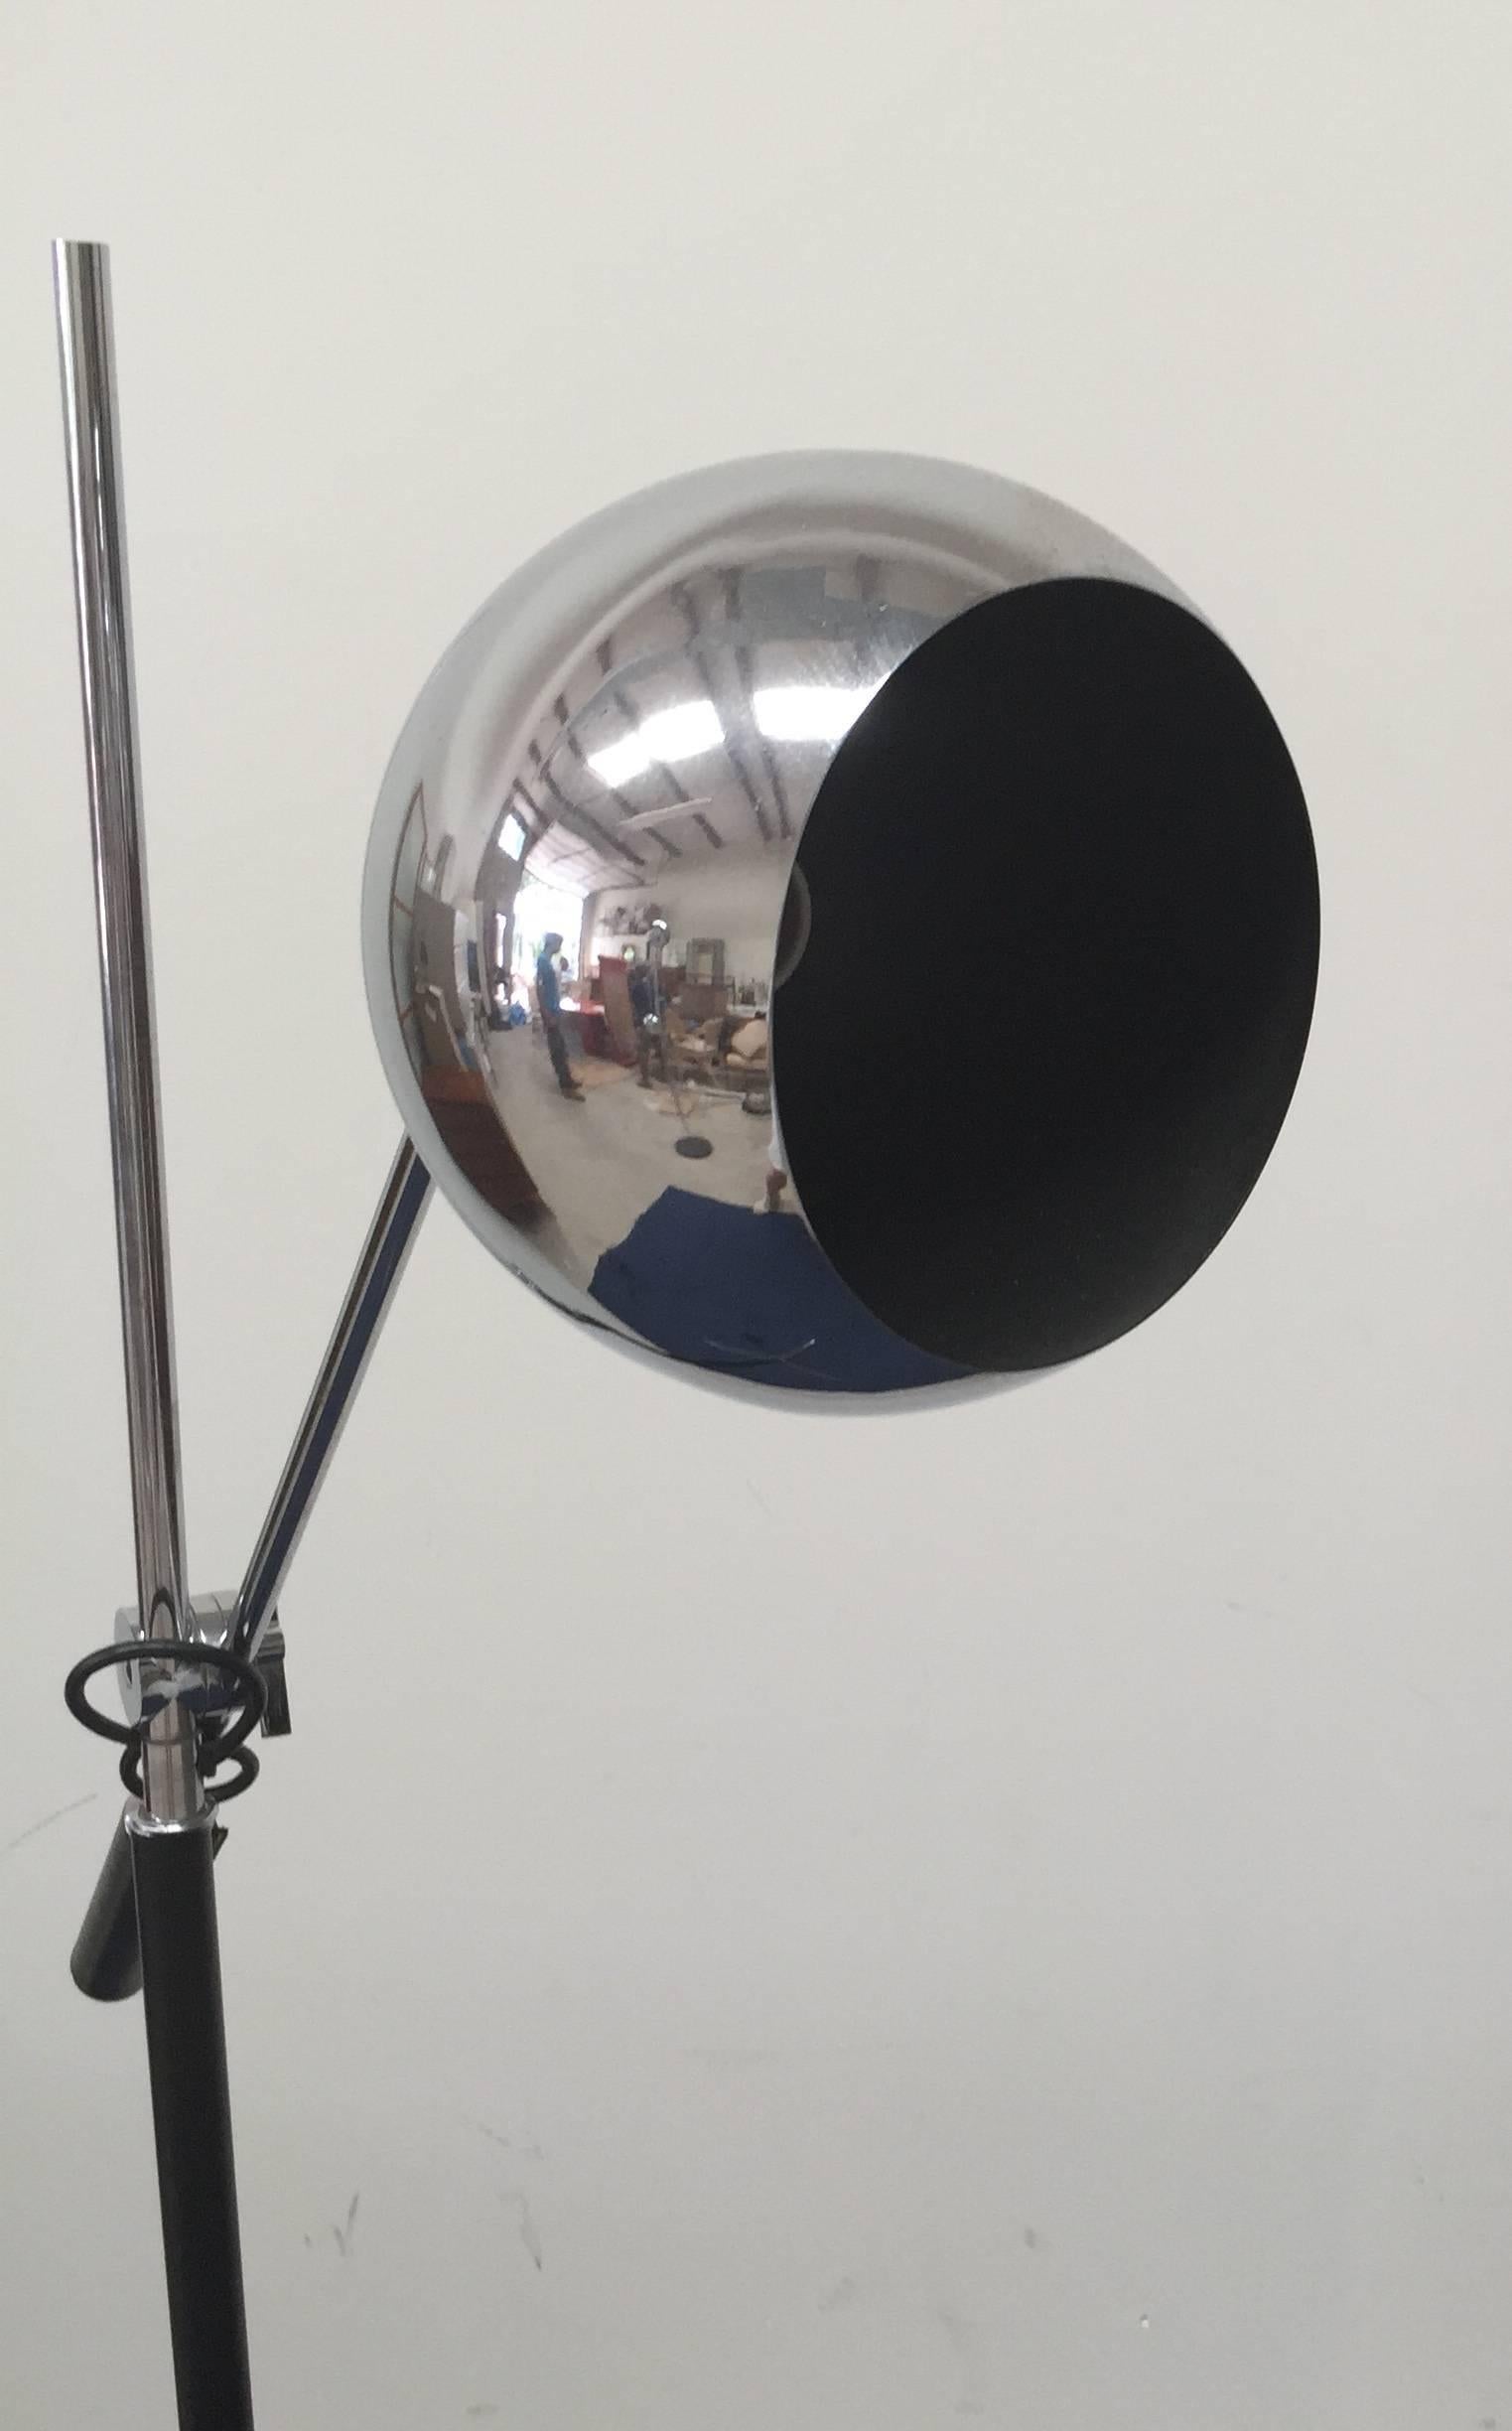 Classic single arm chrome orbiter tripod floor lamp. Excellent vintage condition, original cord and leather wrapped handle, with fully adjustable and articulating head. Chrome is free from pitting or peeling. Measures: 57.75